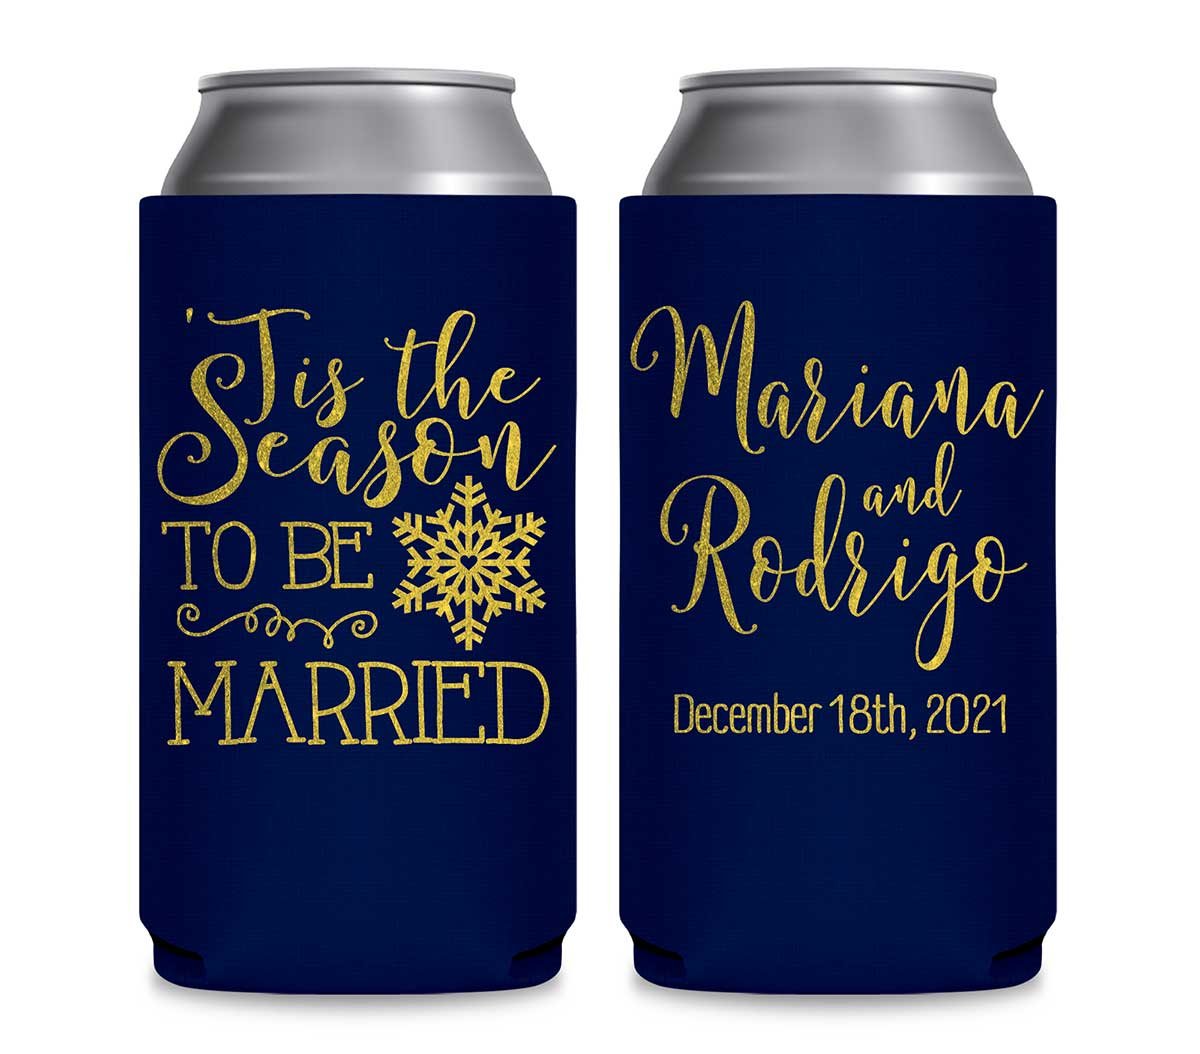 Tis The Season To Be Married 1A Foldable 12 oz Slim Can Koozies Wedding Gifts for Guests